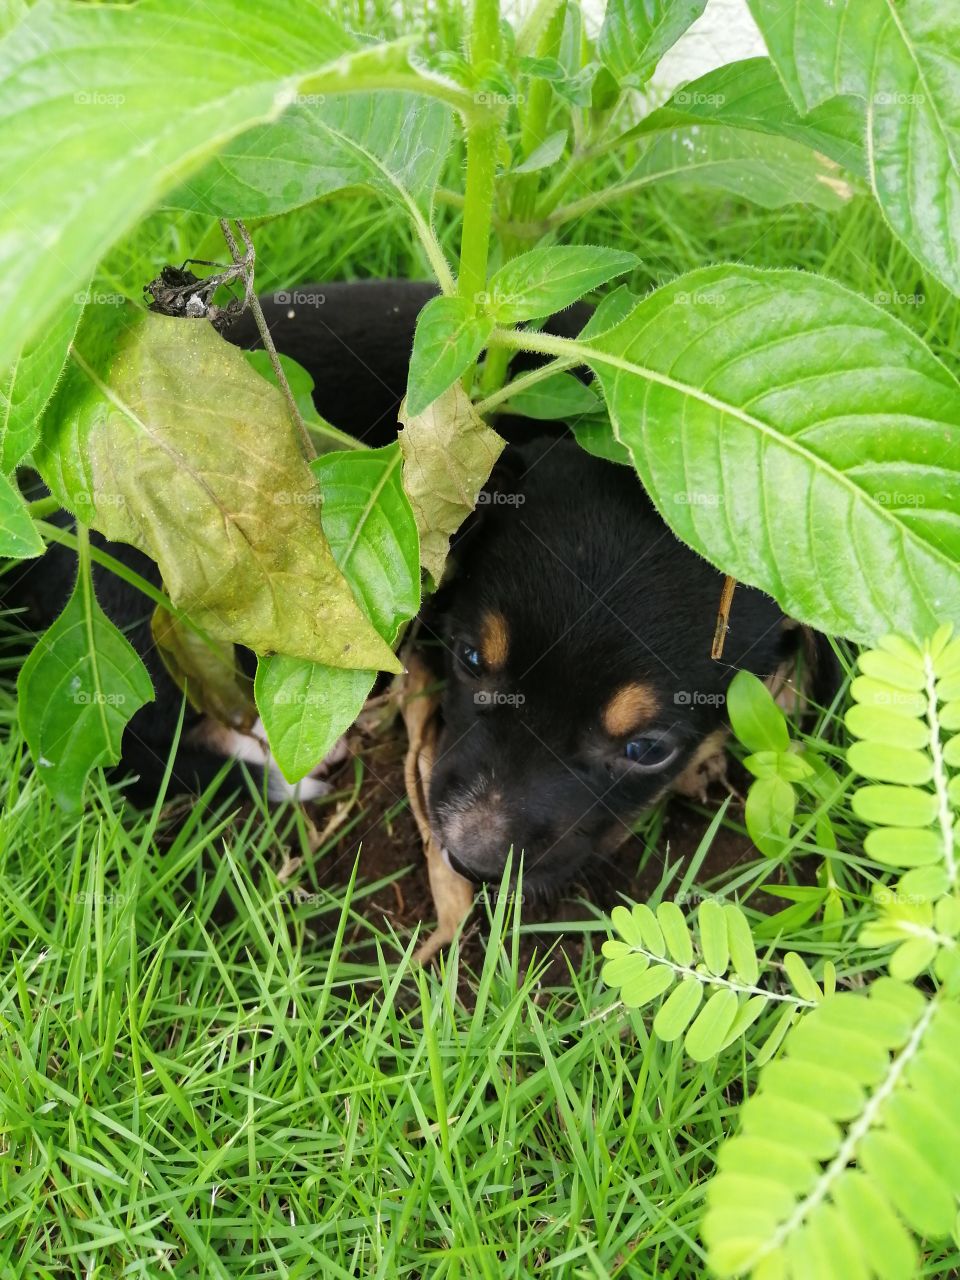 The black puppy is under the plants.